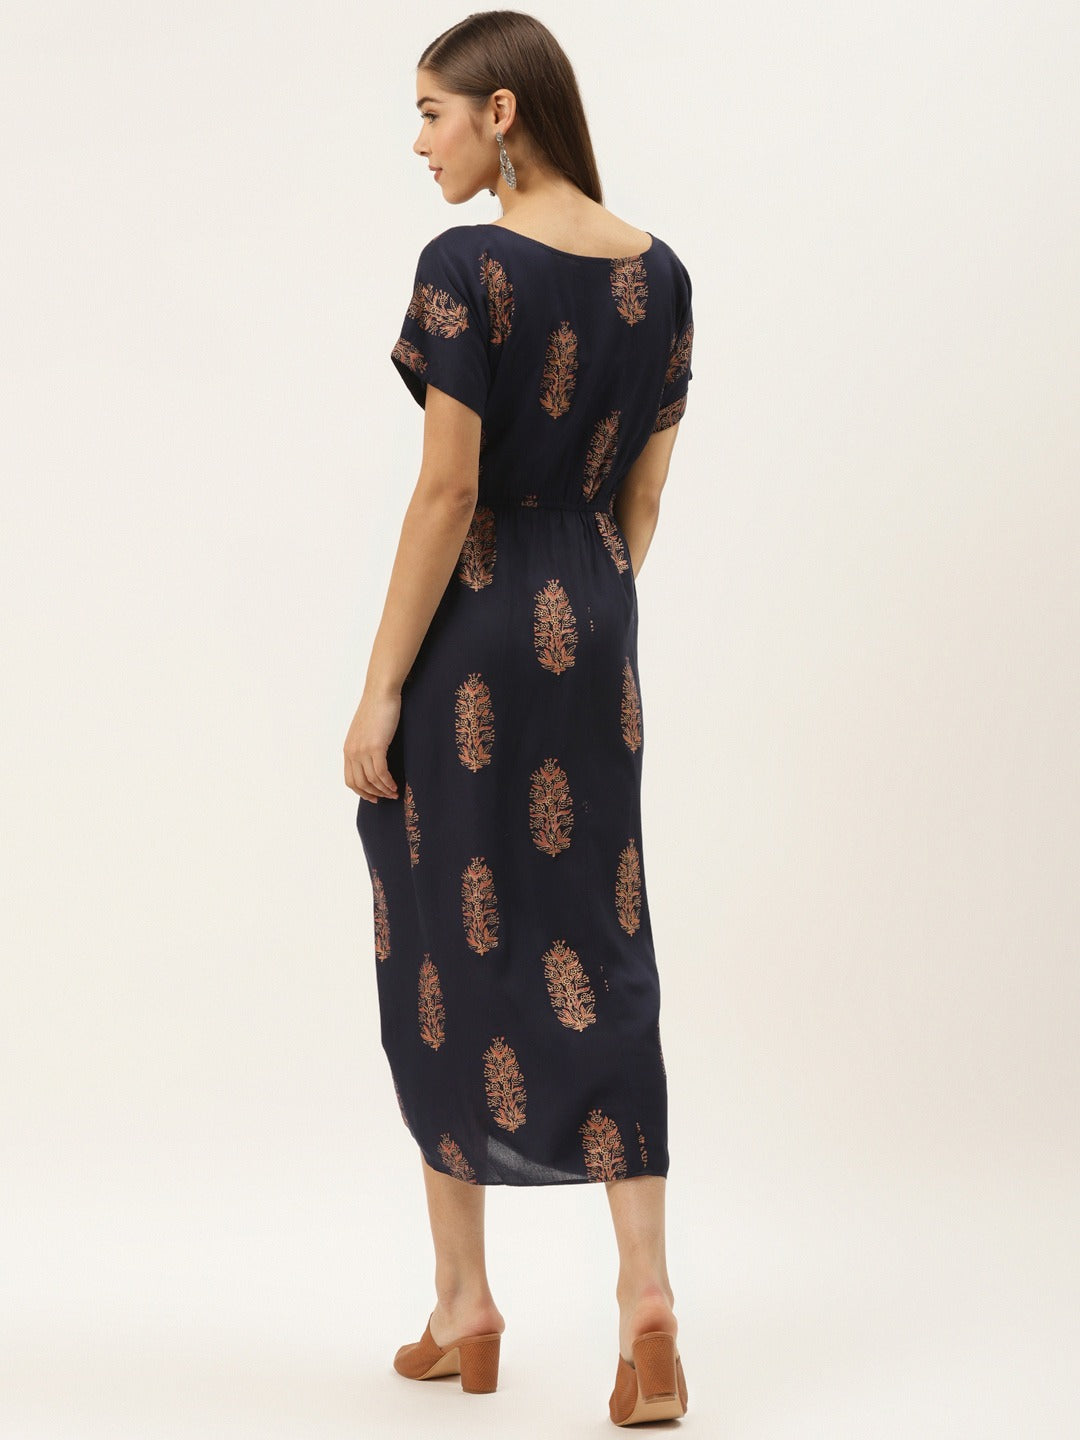 Gold Block Print Front Pleated side cowl dress